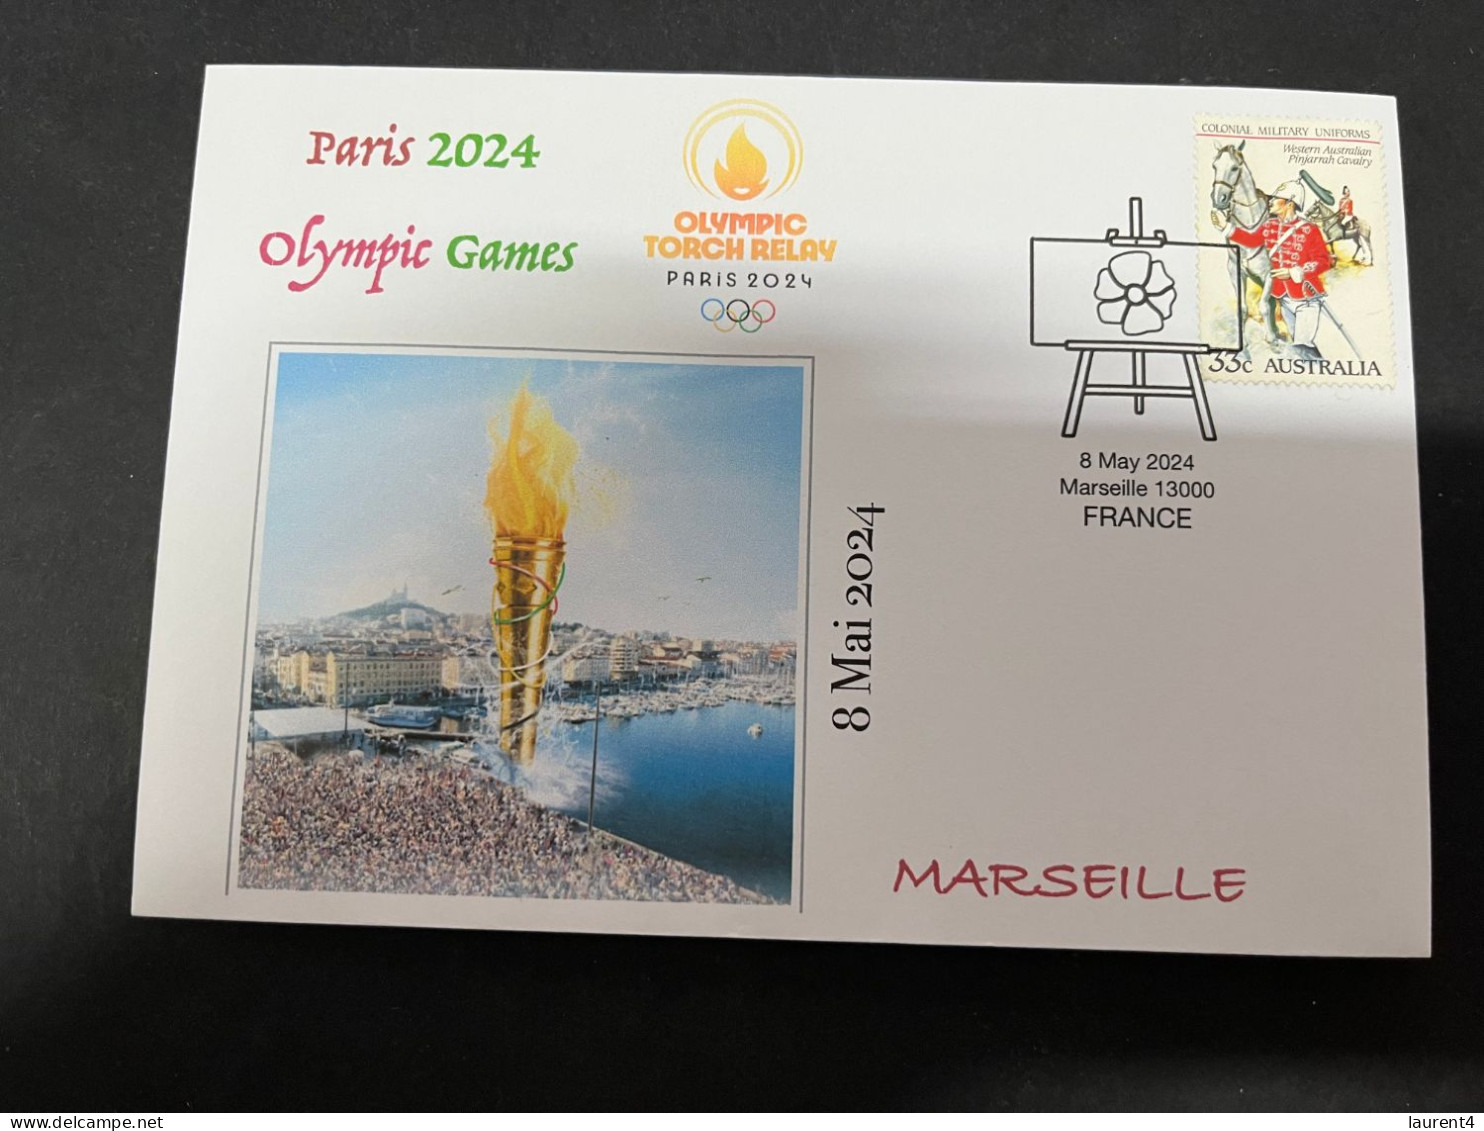 9-5-2024 (4 Z 32) Paris Olympic Games 2024 - The Olympic Flame Travel On Sail Ship BELEM Arrive In Marseille (8-5-2024) - Summer 2024: Paris